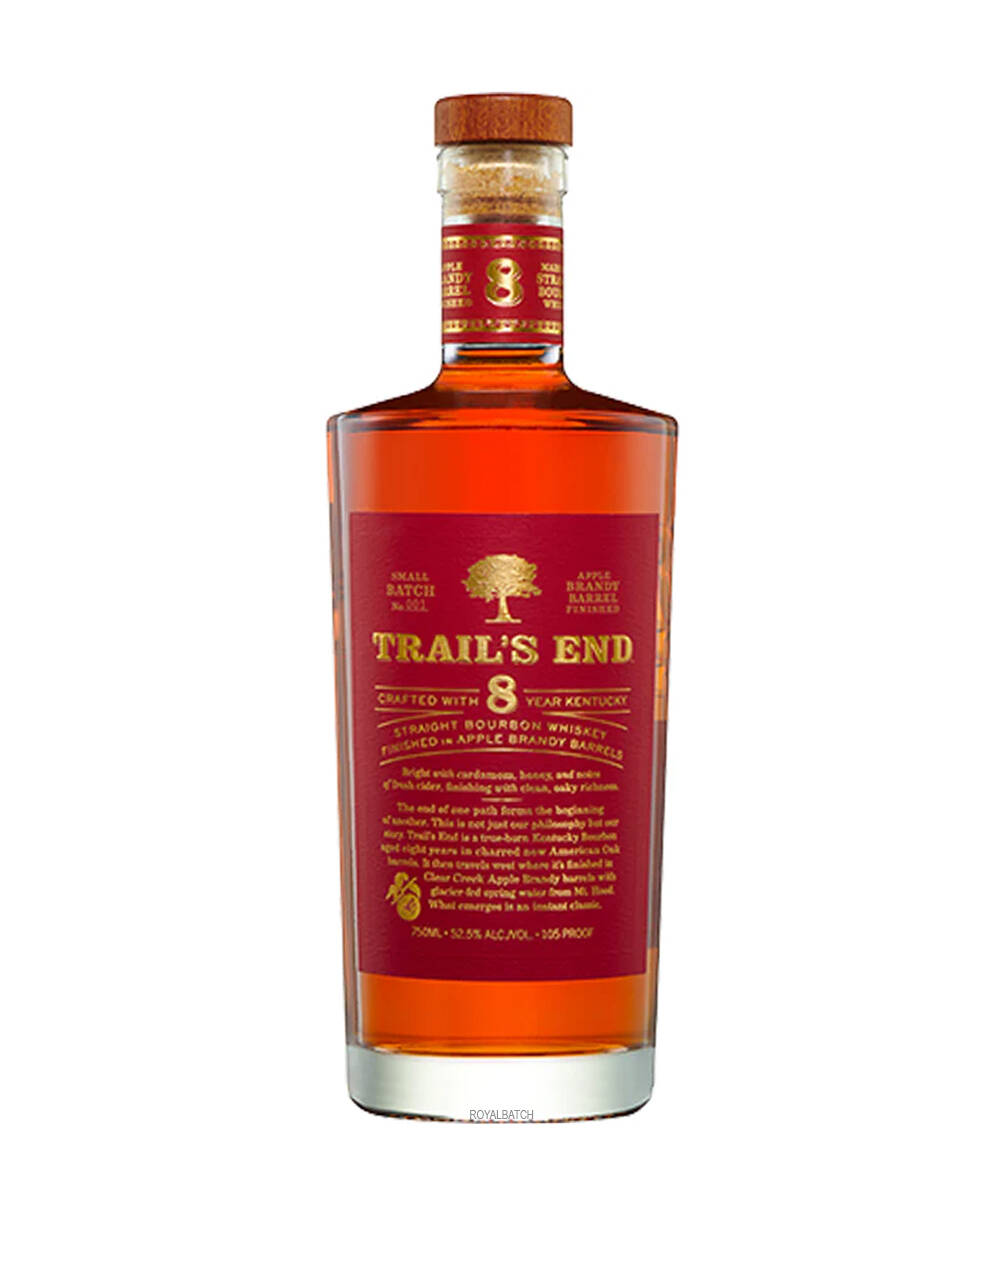 Trails End 8 Year Old Finished in Apple Brandy Barrels Bourbon Whiskey